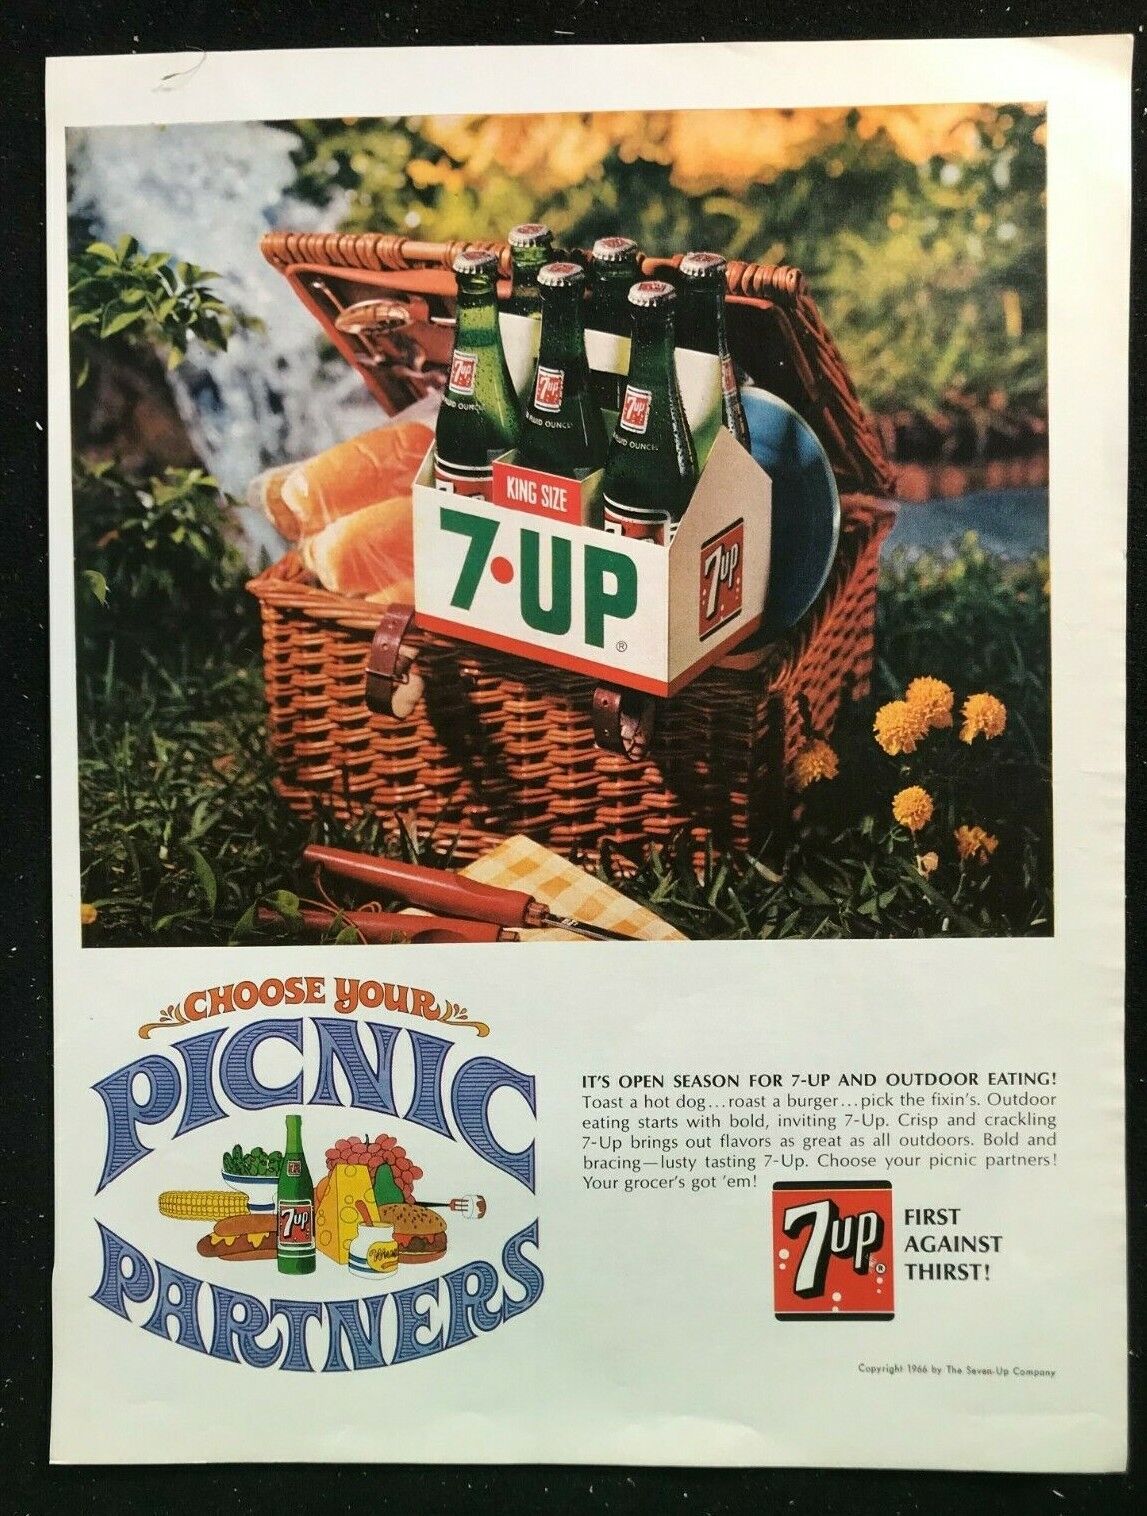 7 UP COLOR PRINT AD - Choose Your Picnic Partners - 1966 - 10.5 x 13.5 